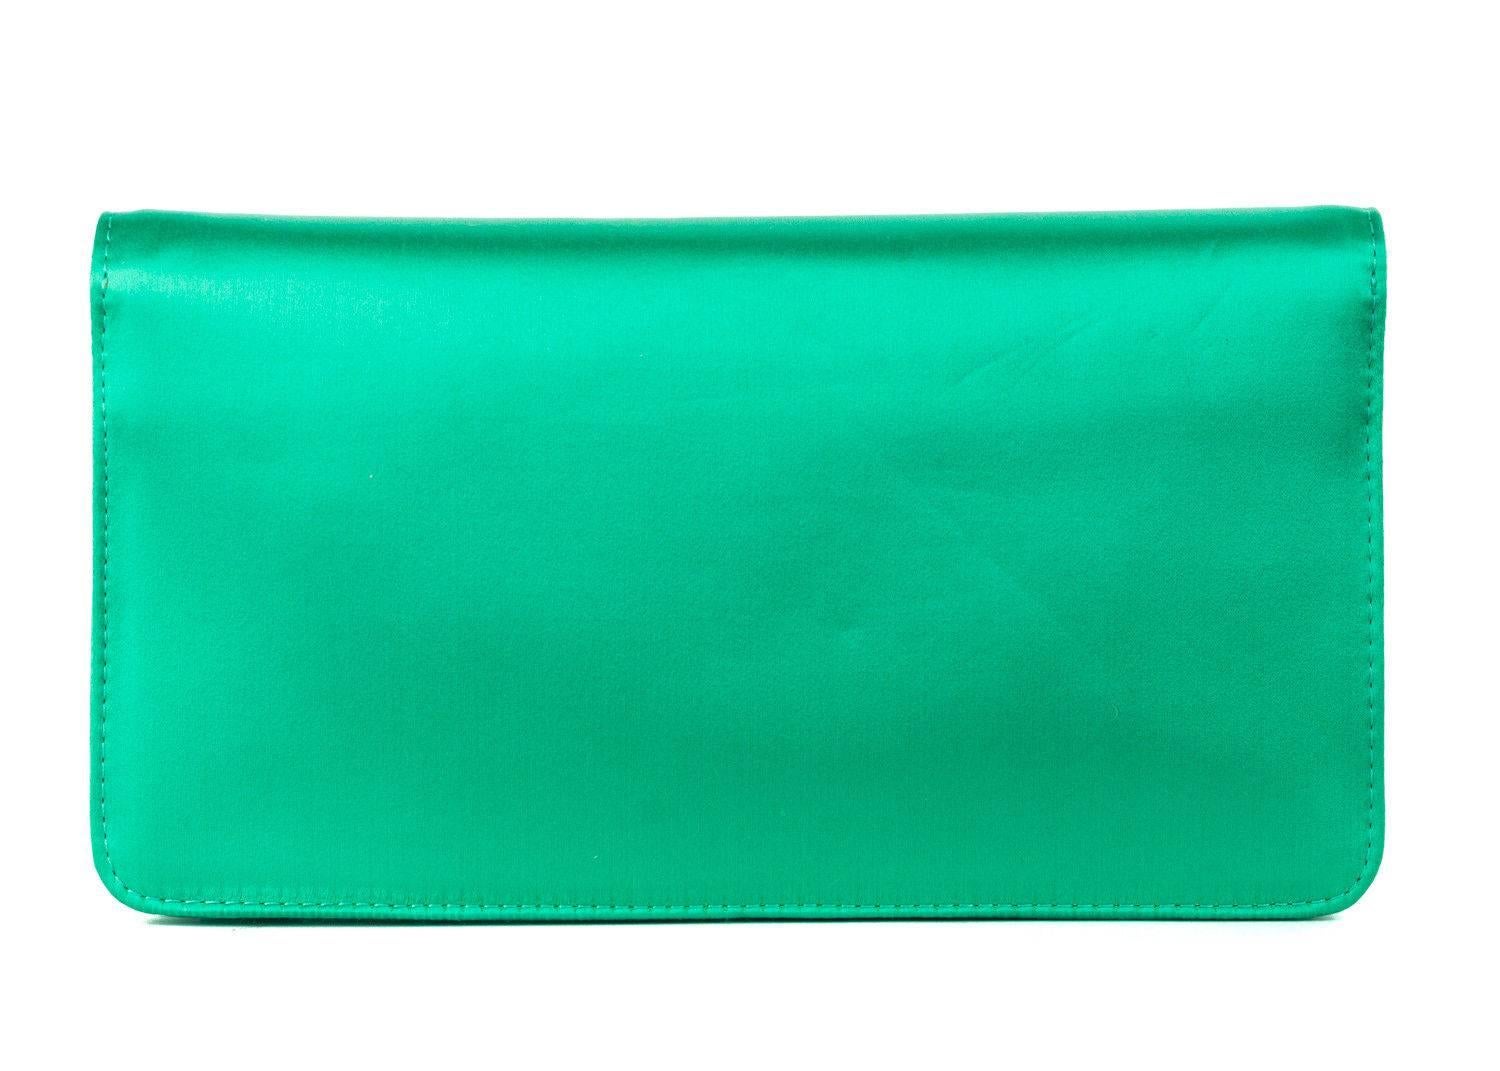 Roberto Cavalli solid green clutch. This clutch features a satin made textile with embroidered and embelished detailing of a horse. This clutch is perfect for a high end luxe look with its satin finish and lovely green color.

 

Satin
Embellished